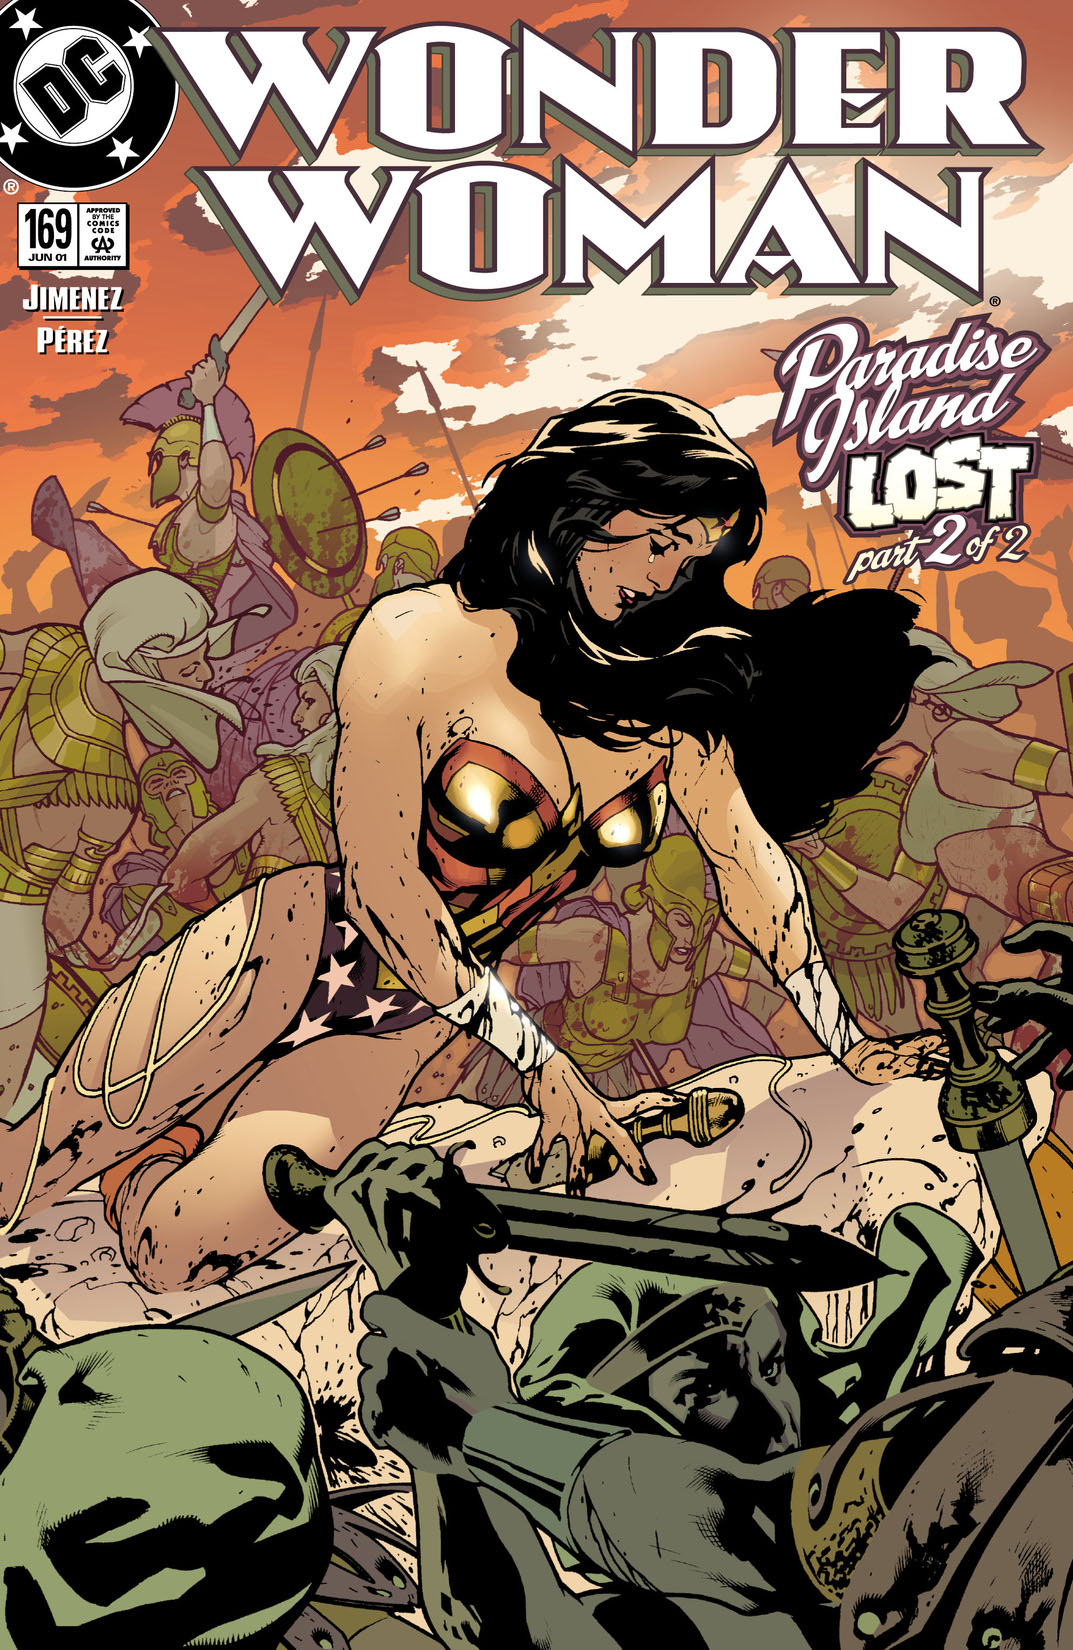 Wonder Woman (1986-) #169 preview images